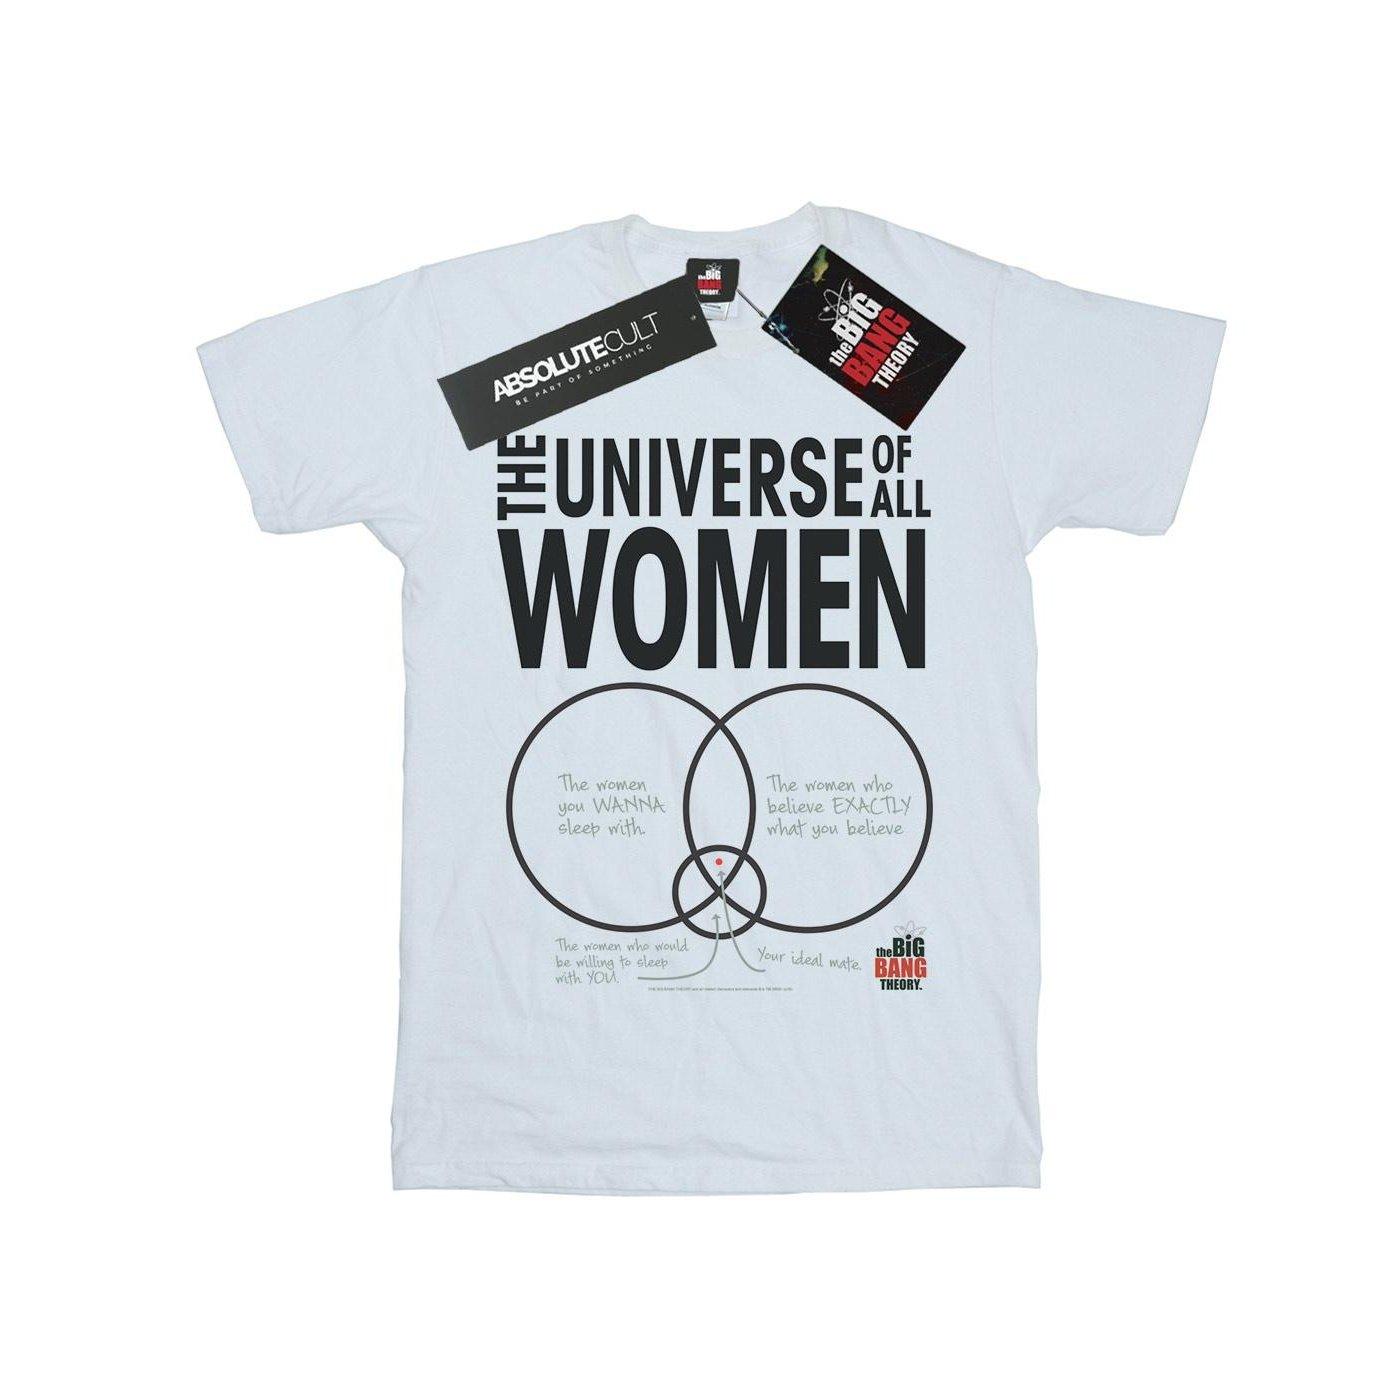 The Universe Of All Women Tshirt Herren Weiss L von The Big Bang Theory